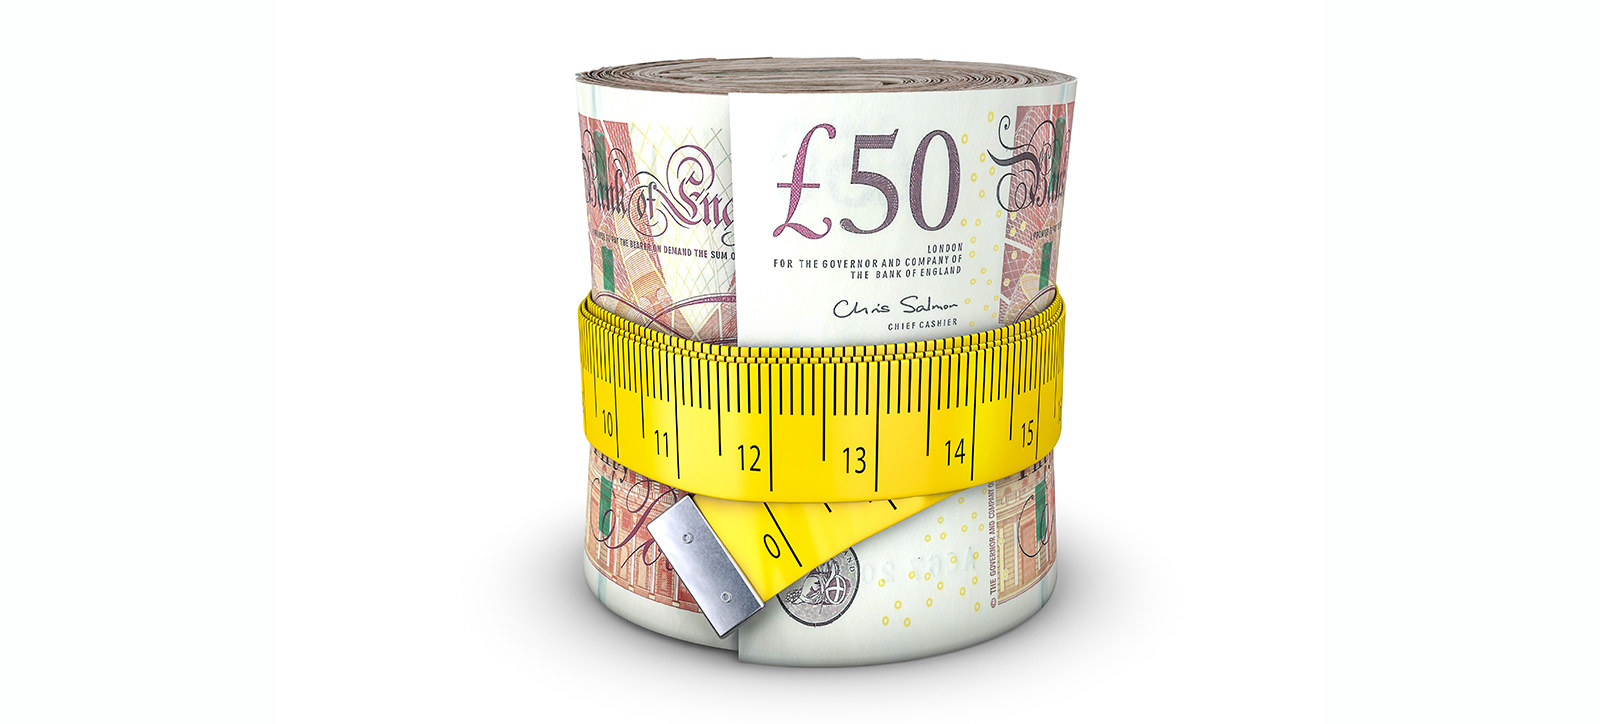 A roll of £50 notes, pulled tight by a tape measure around the middle to symbolise weight loss